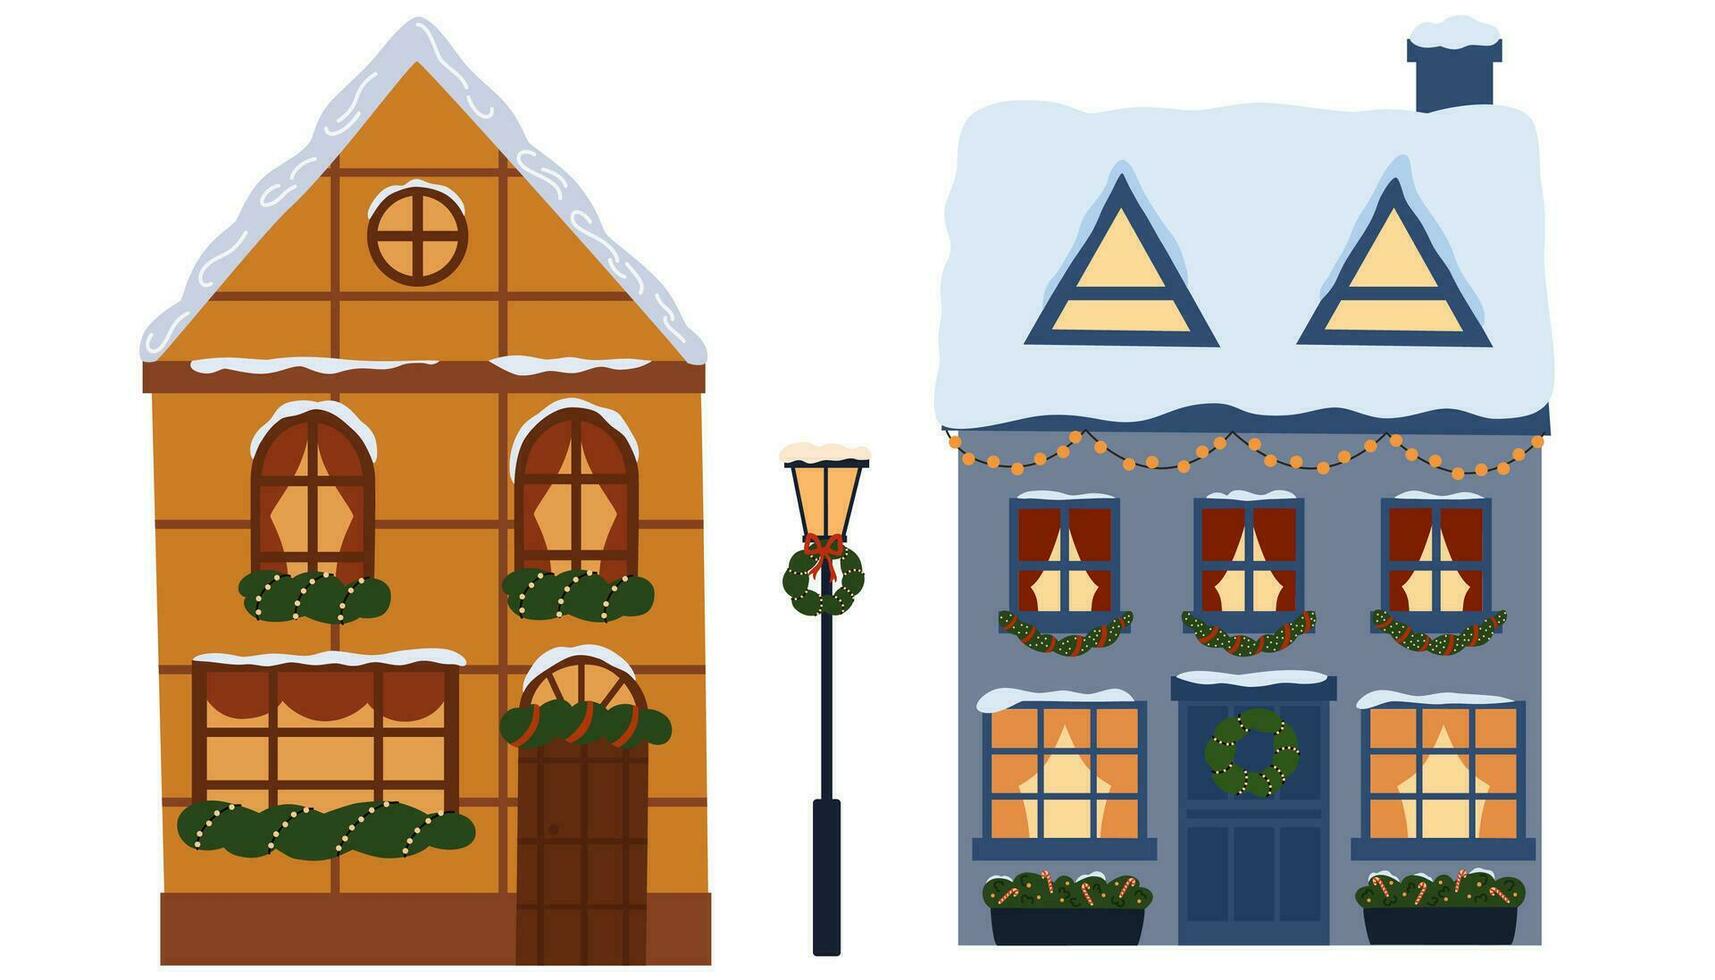 Winter Christmas house set. European houses building with Christmas decoration on facade. Cute flat home with snow on roof, decorated for Xmas, winter holiday. Vector illustration